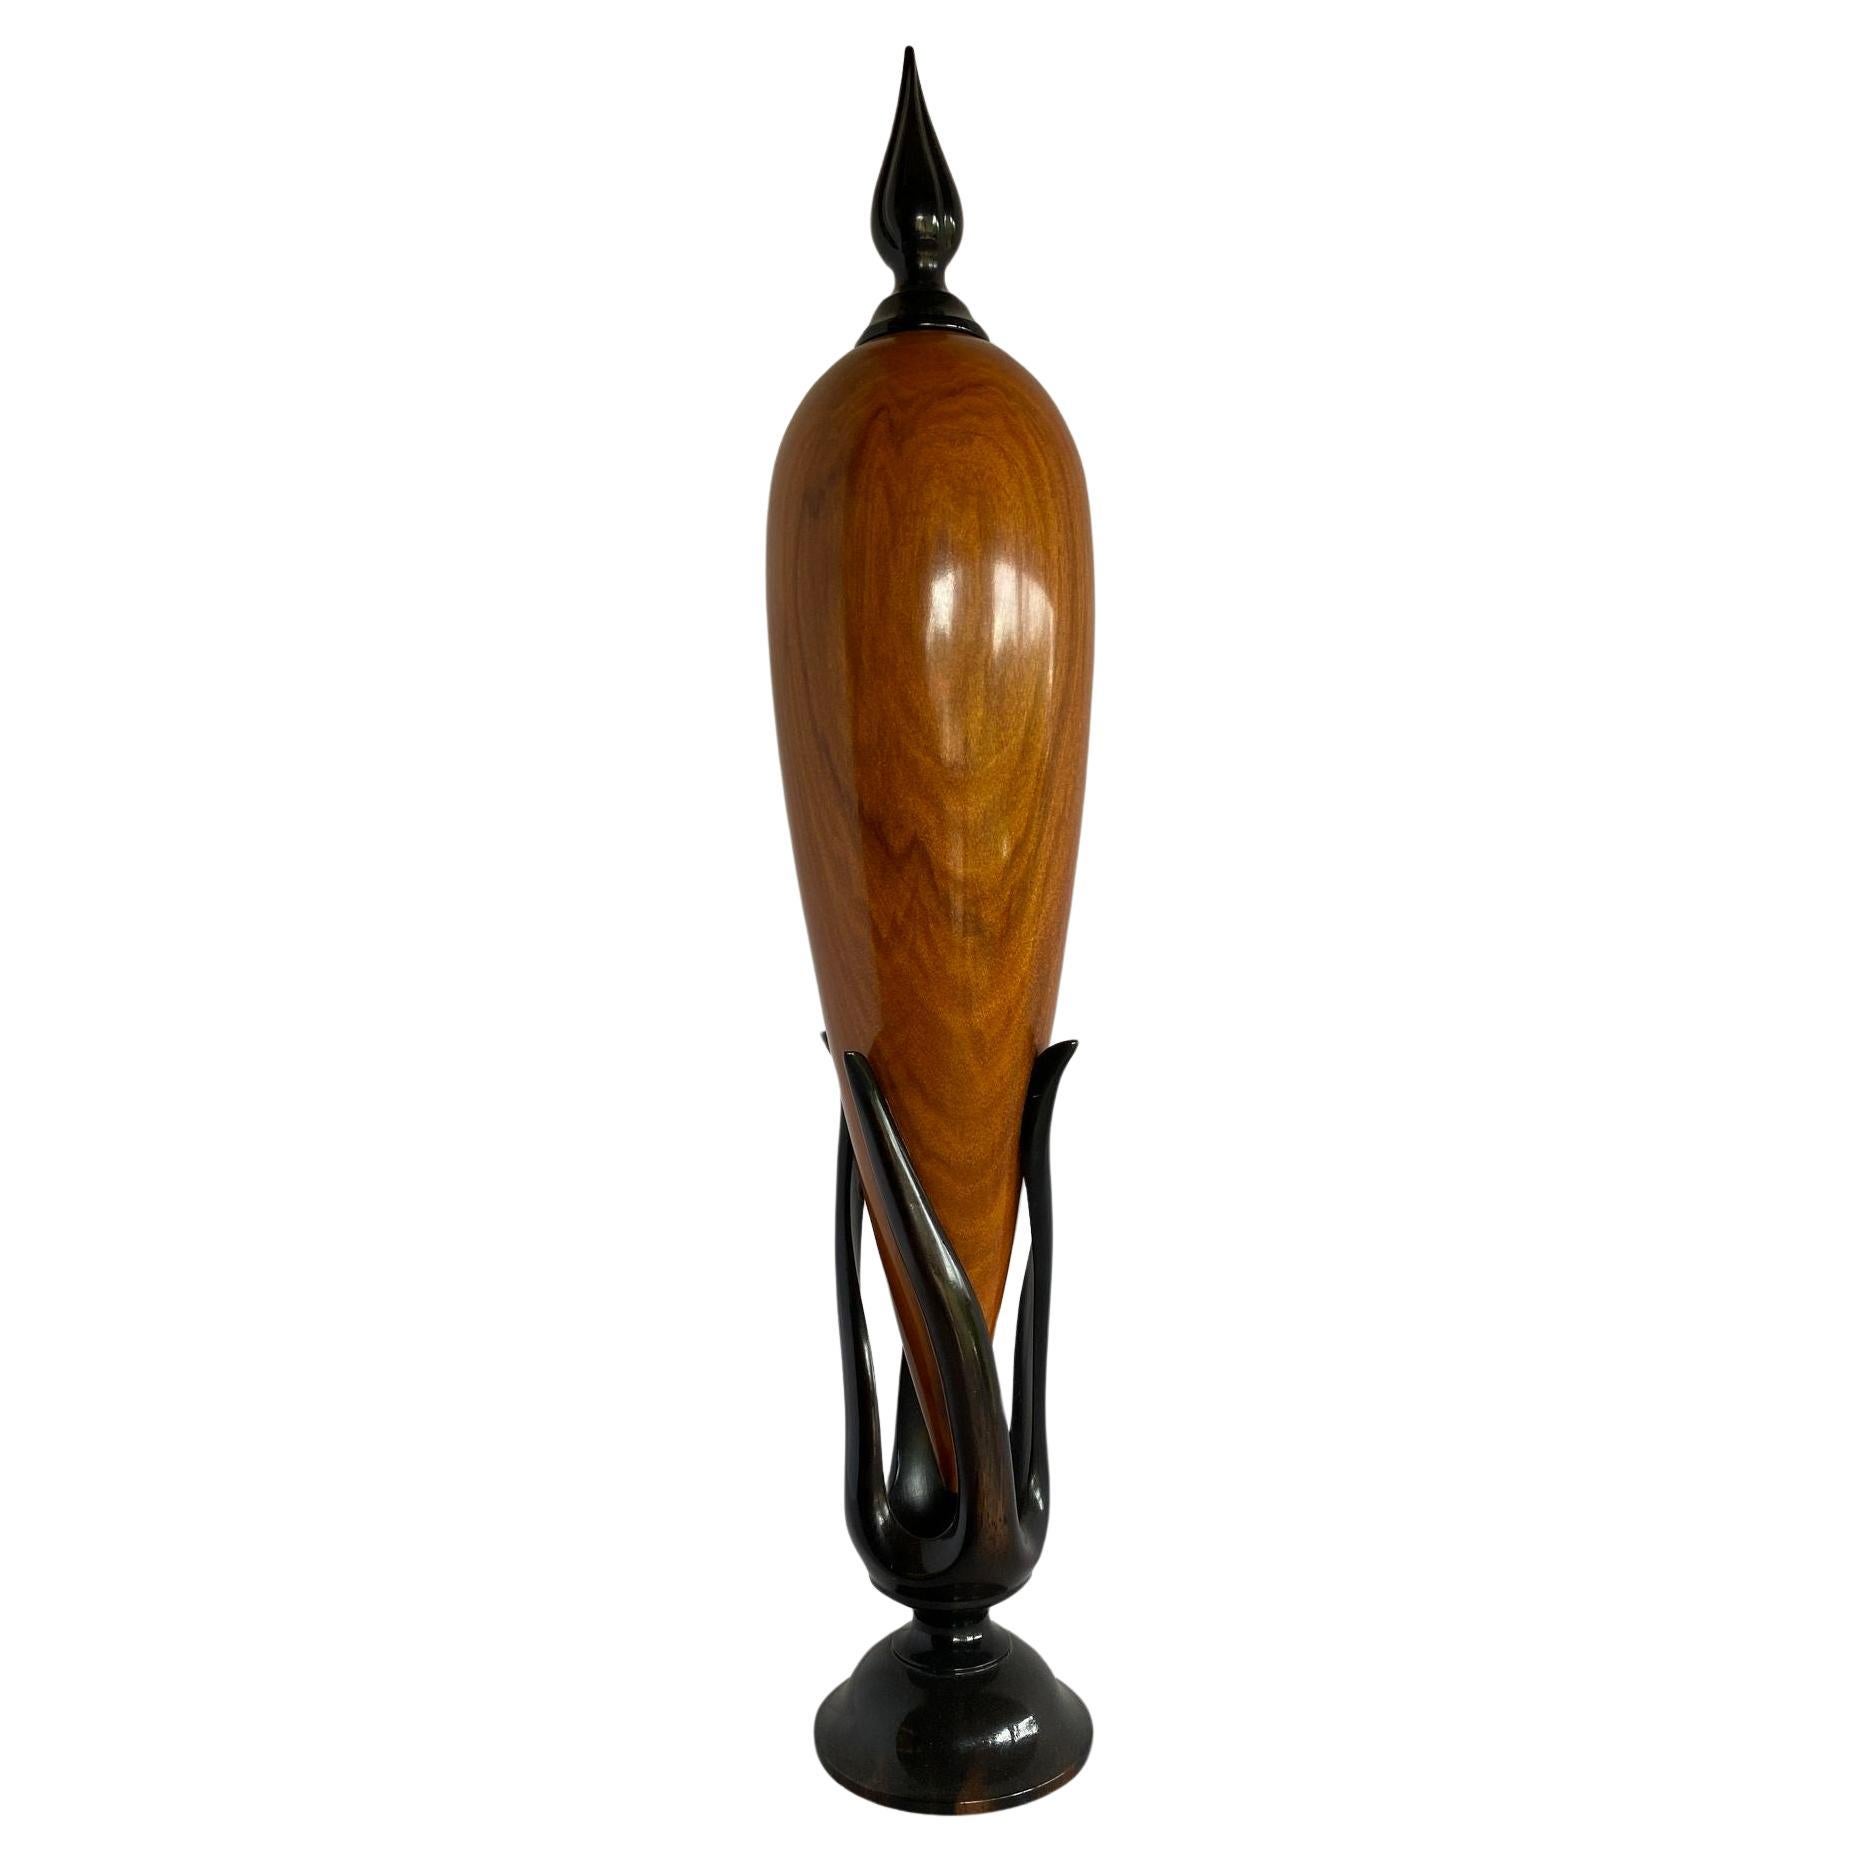 Sculpted Ebony and Chakte Kok Wood "Hollow Vessel" #14 by Don Comer Lacma For Sale